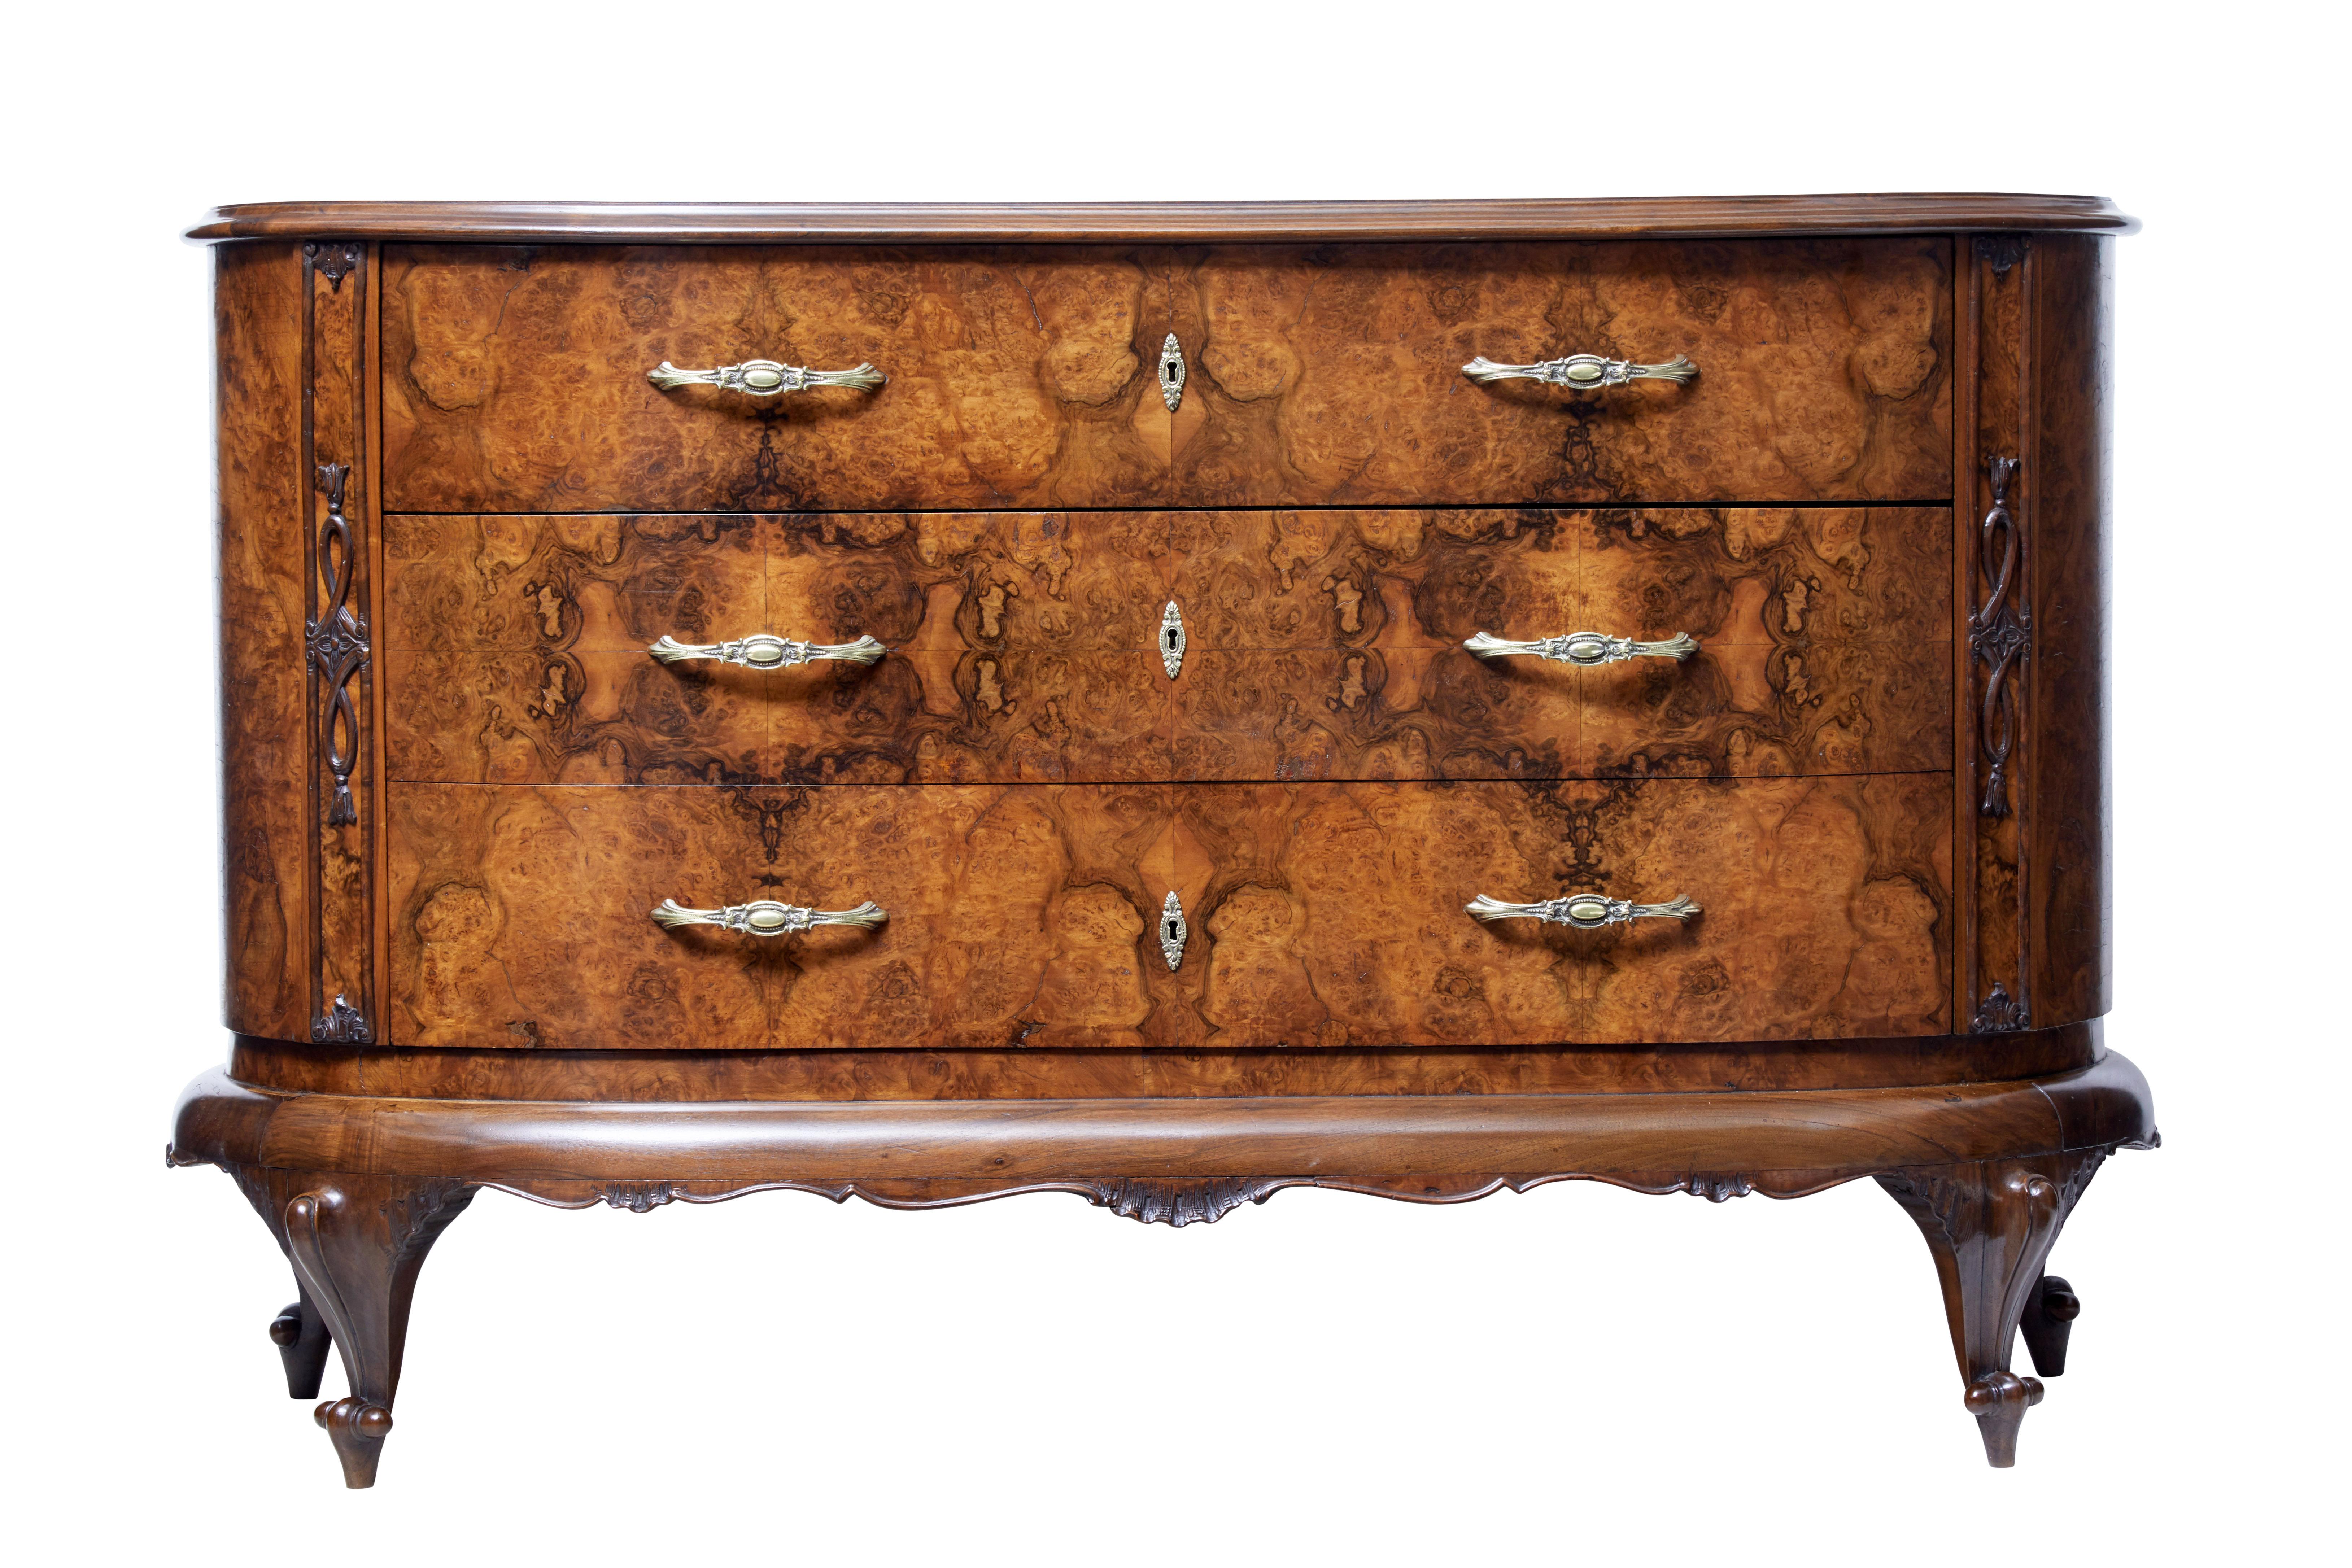 Beautiful bowfront sideboard, circa 1900.

3 deep drawers with quarter veneers. Fitted with ornate brass handles and escutheons. Applied carvings to the side. Carved shells to the front freize which link to the 4 scrolling legs.

Top fitted with